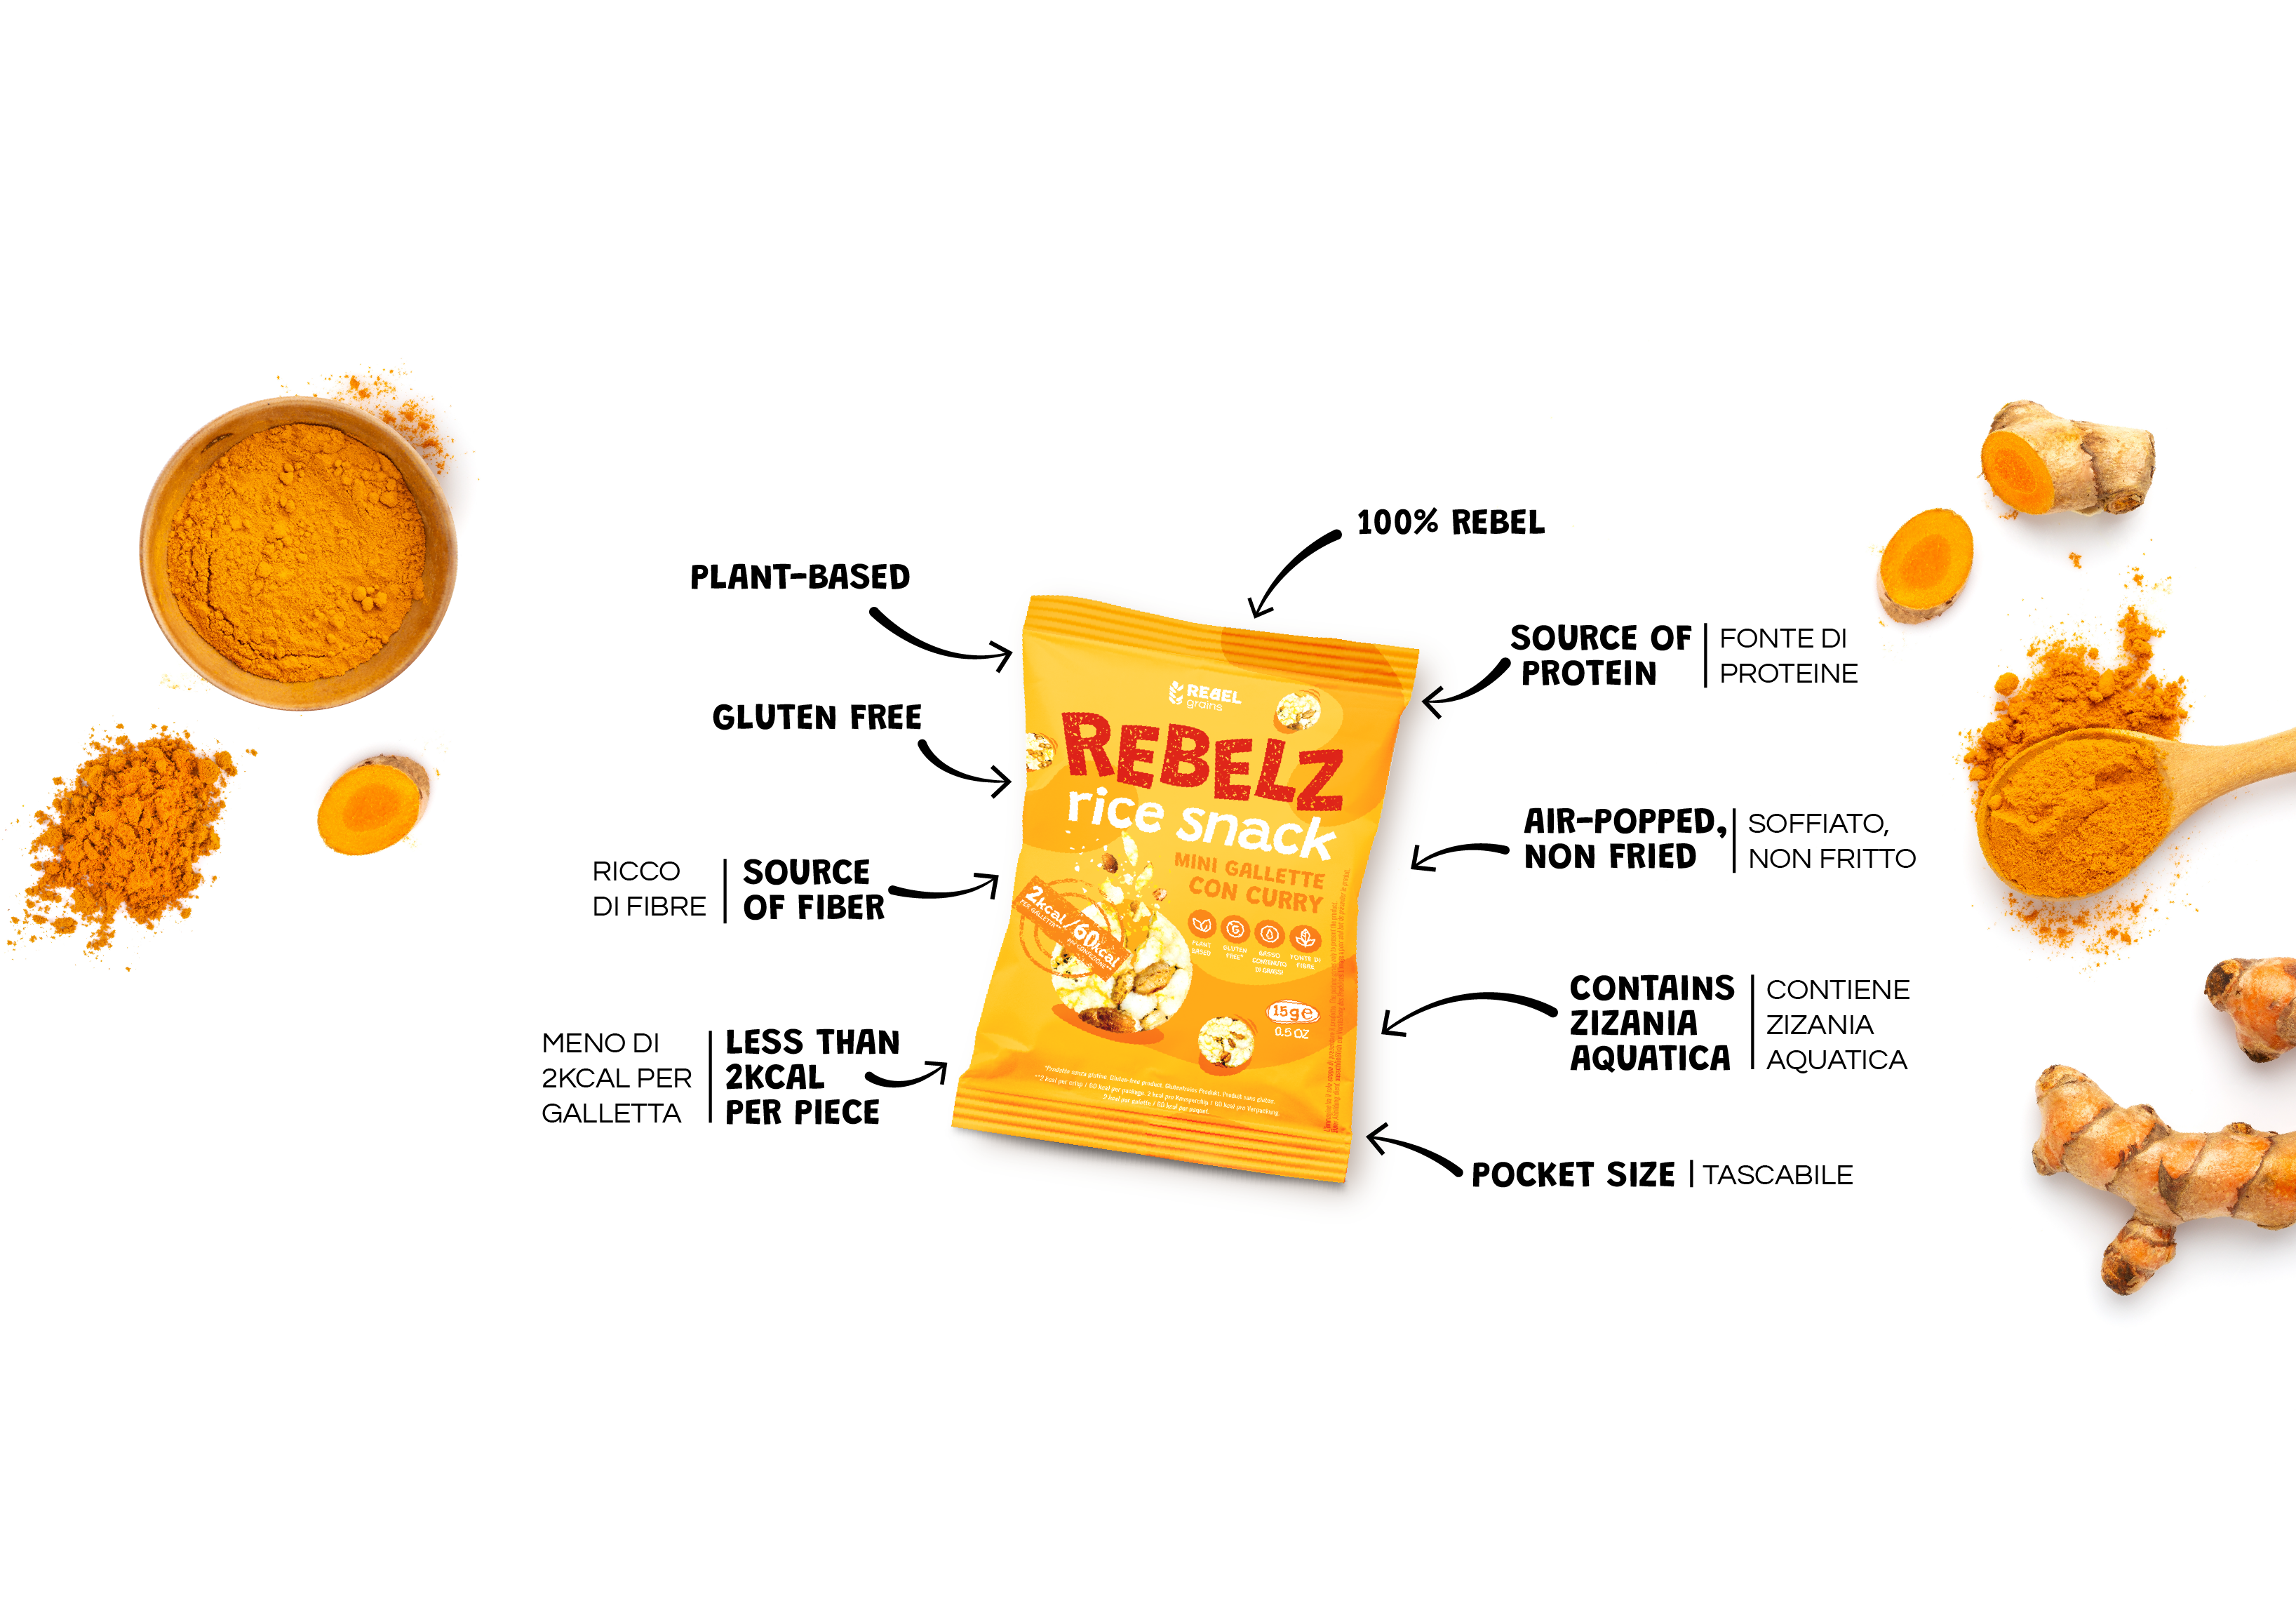 Rebelz rice snack in curry flavor has many benefits around, pointing to the product besides plant-based, gluten free, source of protein…etc)